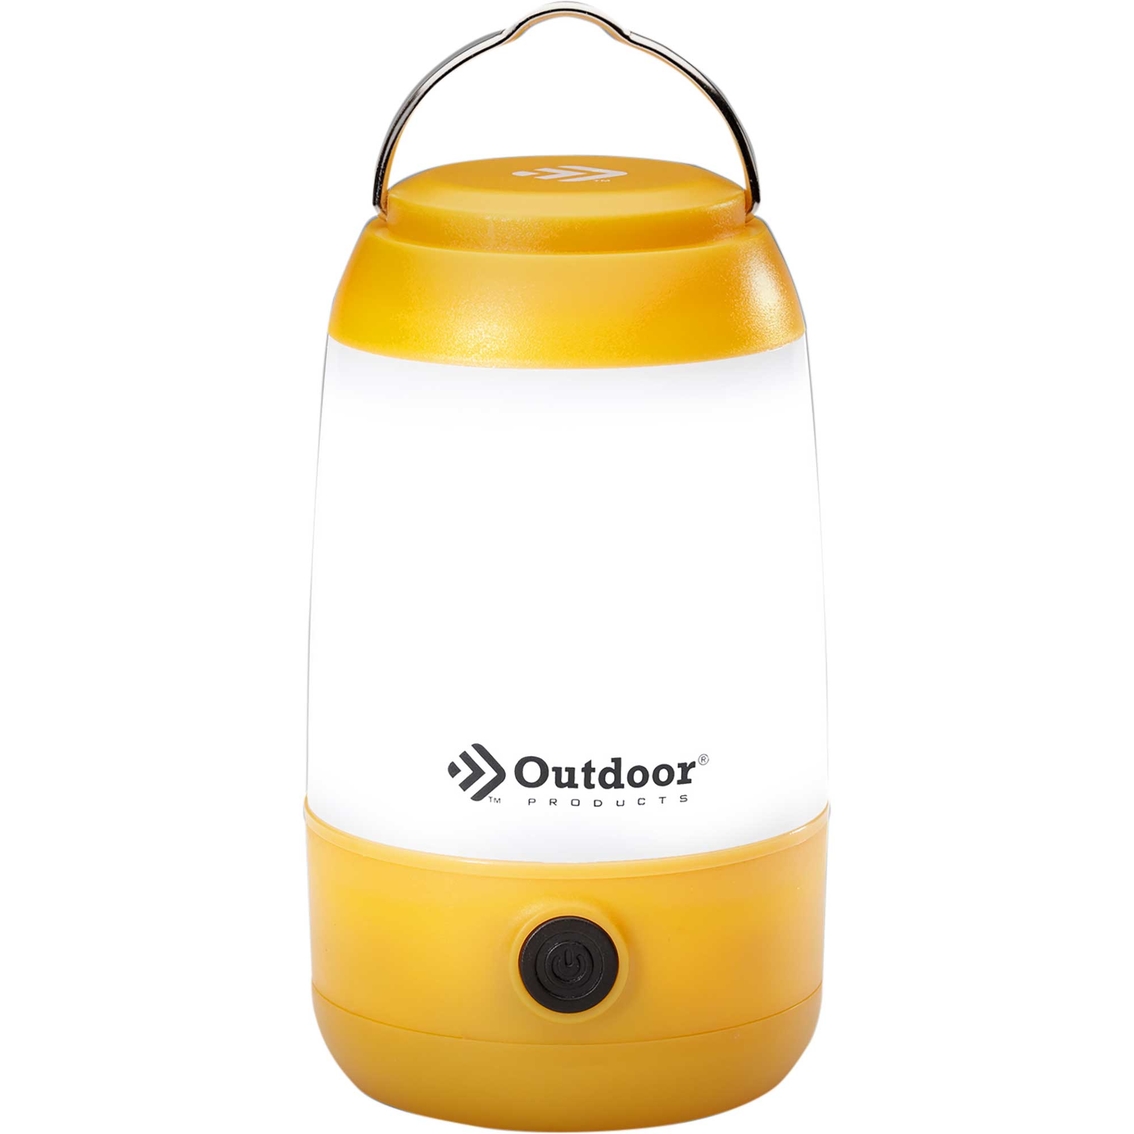 Outdoor Products 200L Compact Camp Lantern - Image 6 of 7